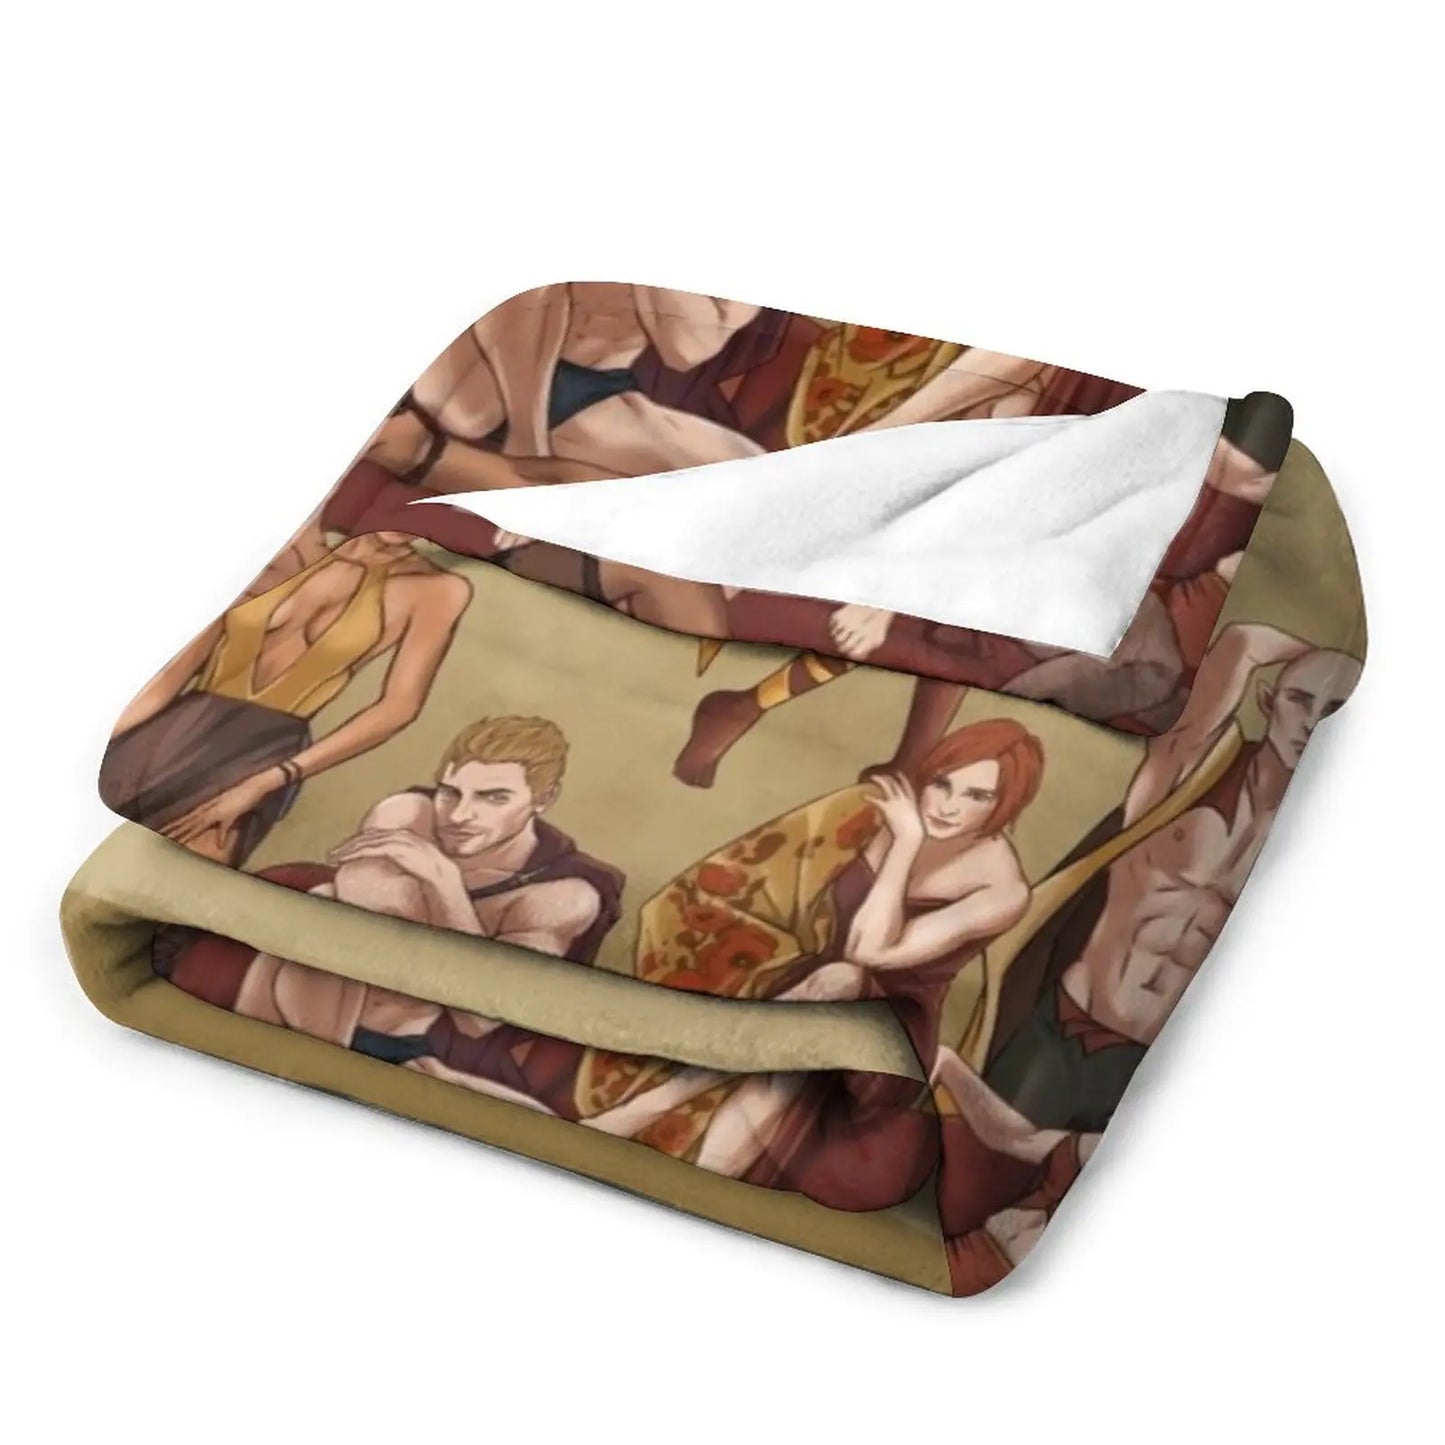 Dragon Age Inquisition - PJ's Series Throw Blanket Fluffy Soft Blankets Blankets For Sofas